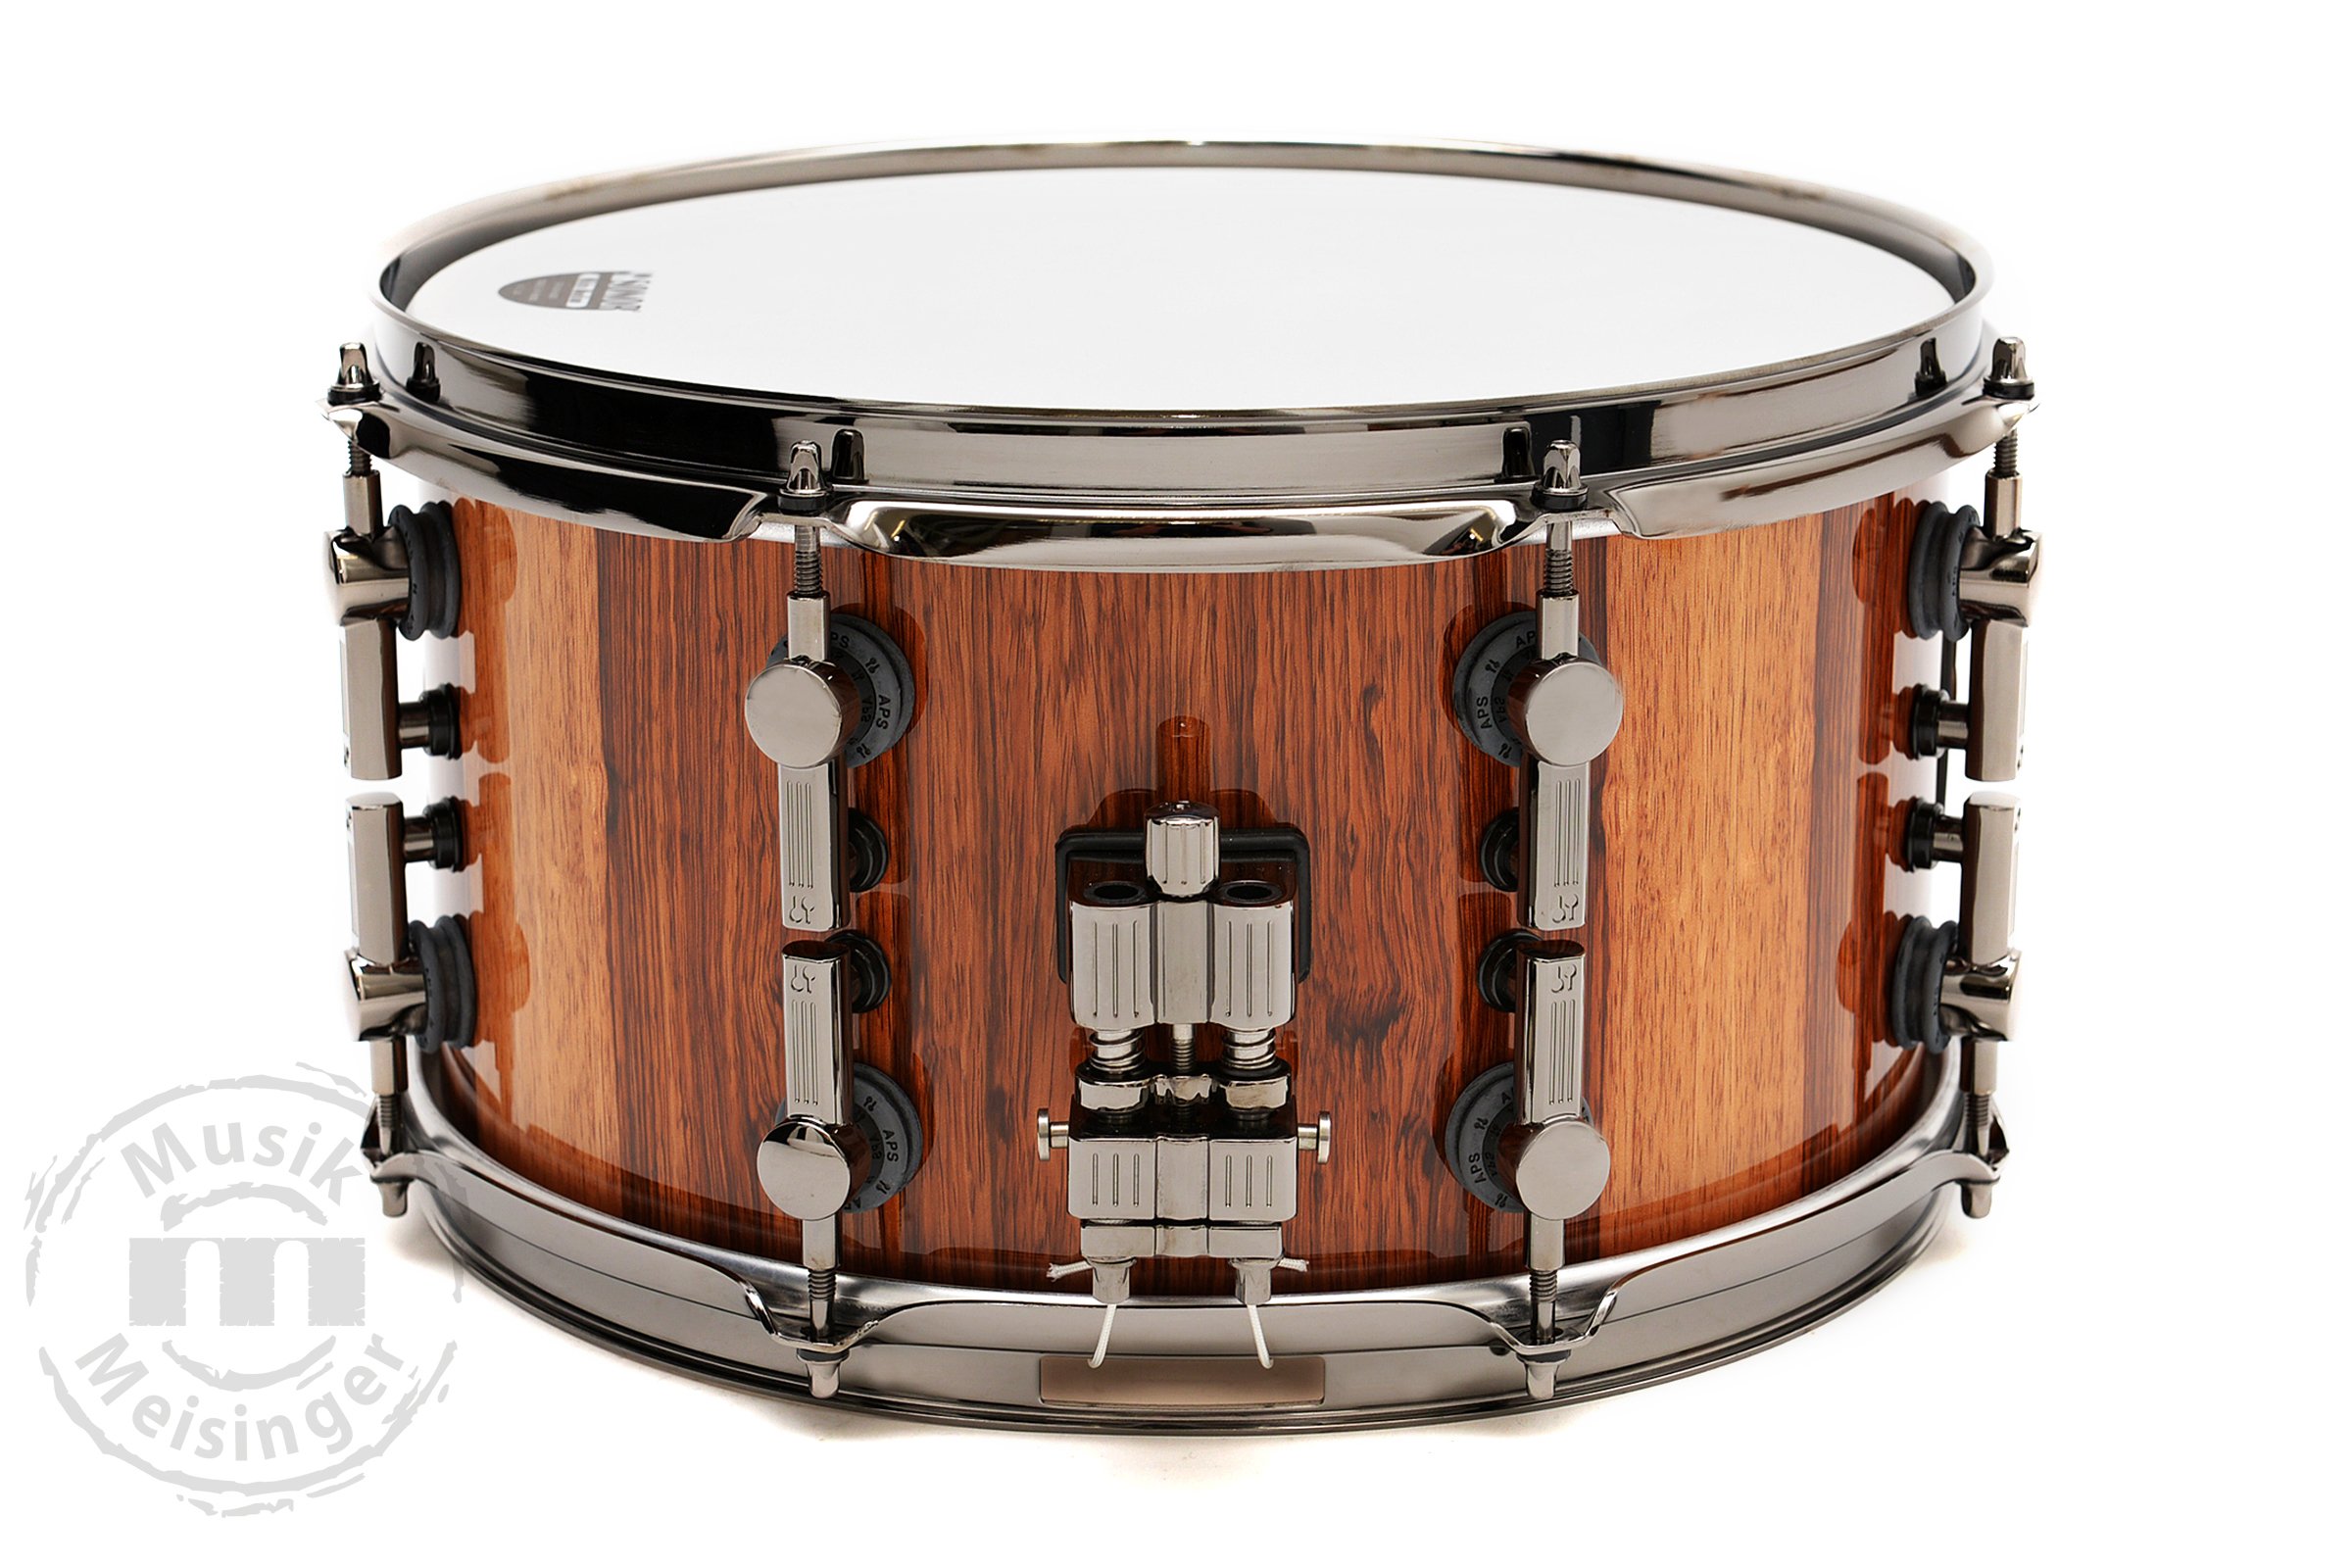 Sonor One of a Kind Snare Mango 13x7